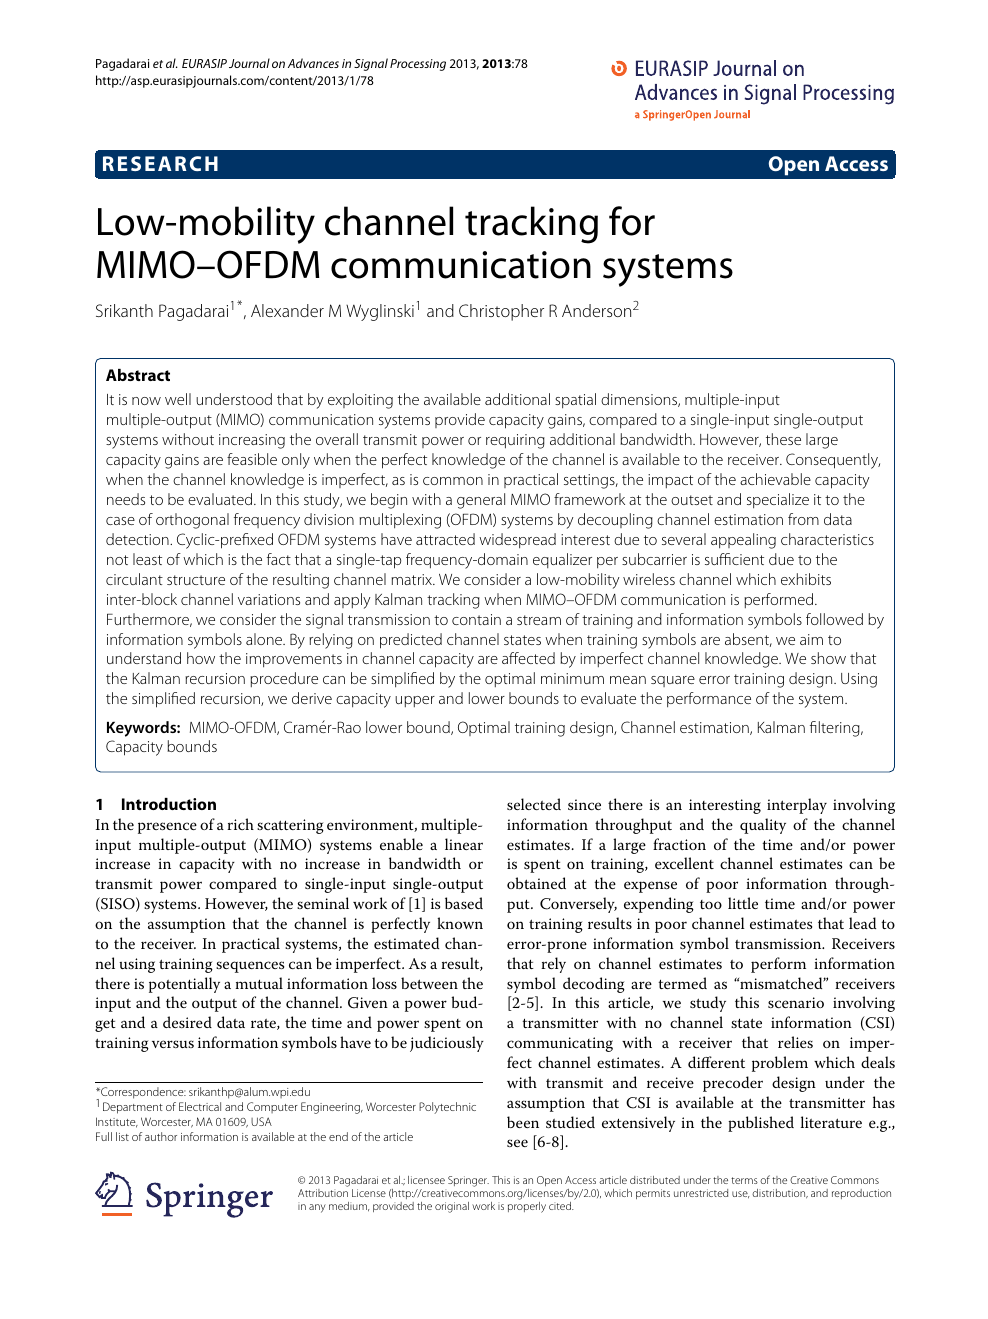 Low Mobility Channel Tracking For Mimo Ofdm Communication Systems Topic Of Research Paper In Electrical Engineering Electronic Engineering Information Engineering Download Scholarly Article Pdf And Read For Free On Cyberleninka Open Science Hub